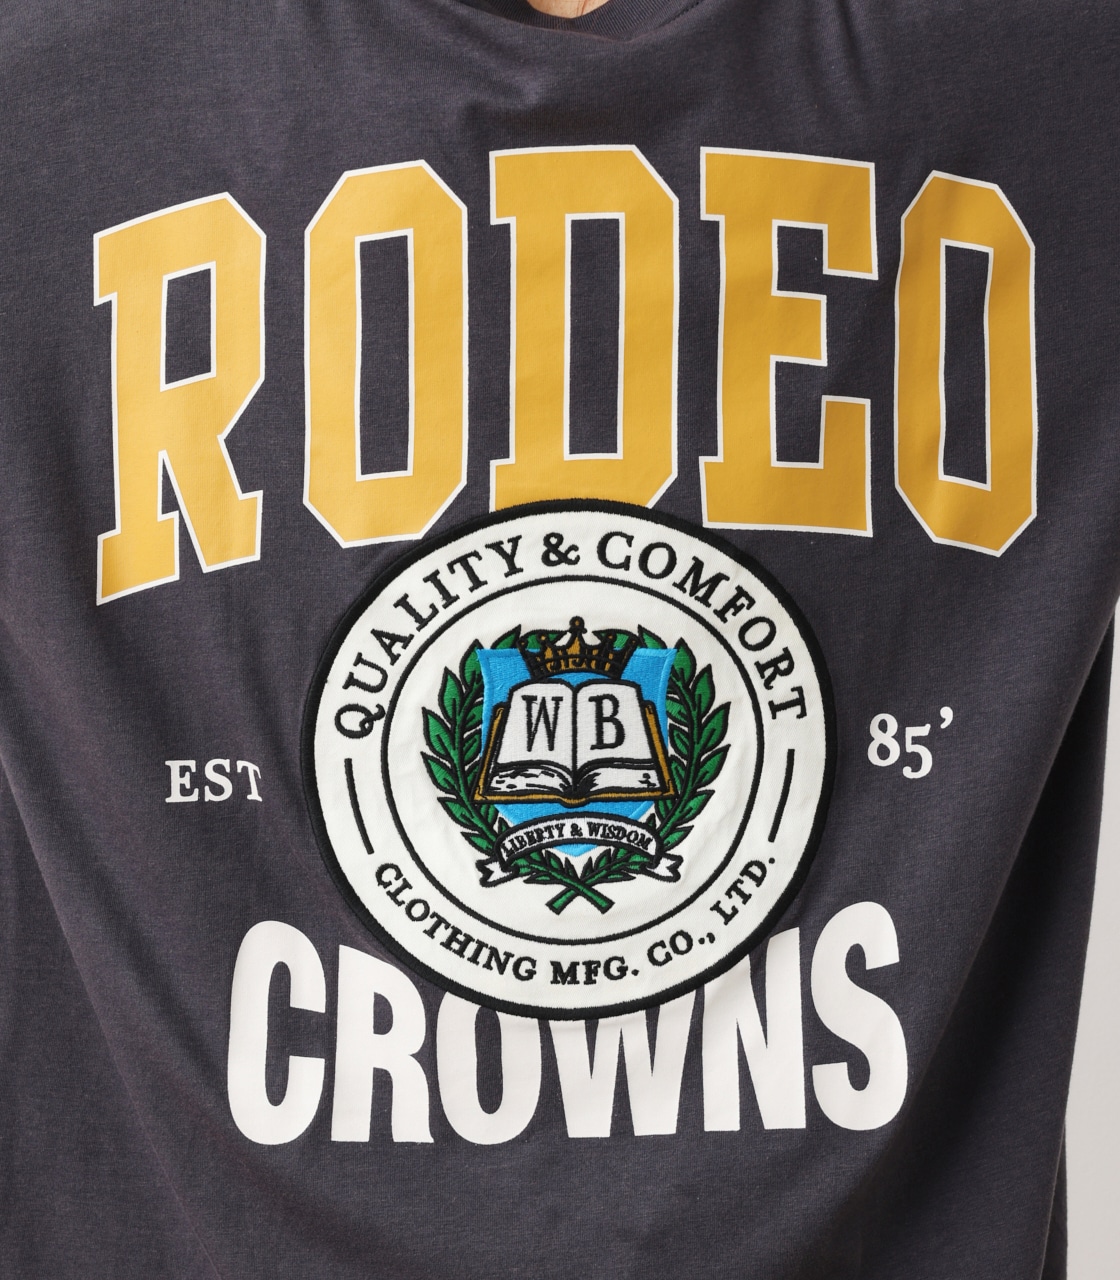 RODEO CROWNS WIDE BOWL | Rodeo College L/S Tシャツ (Tシャツ